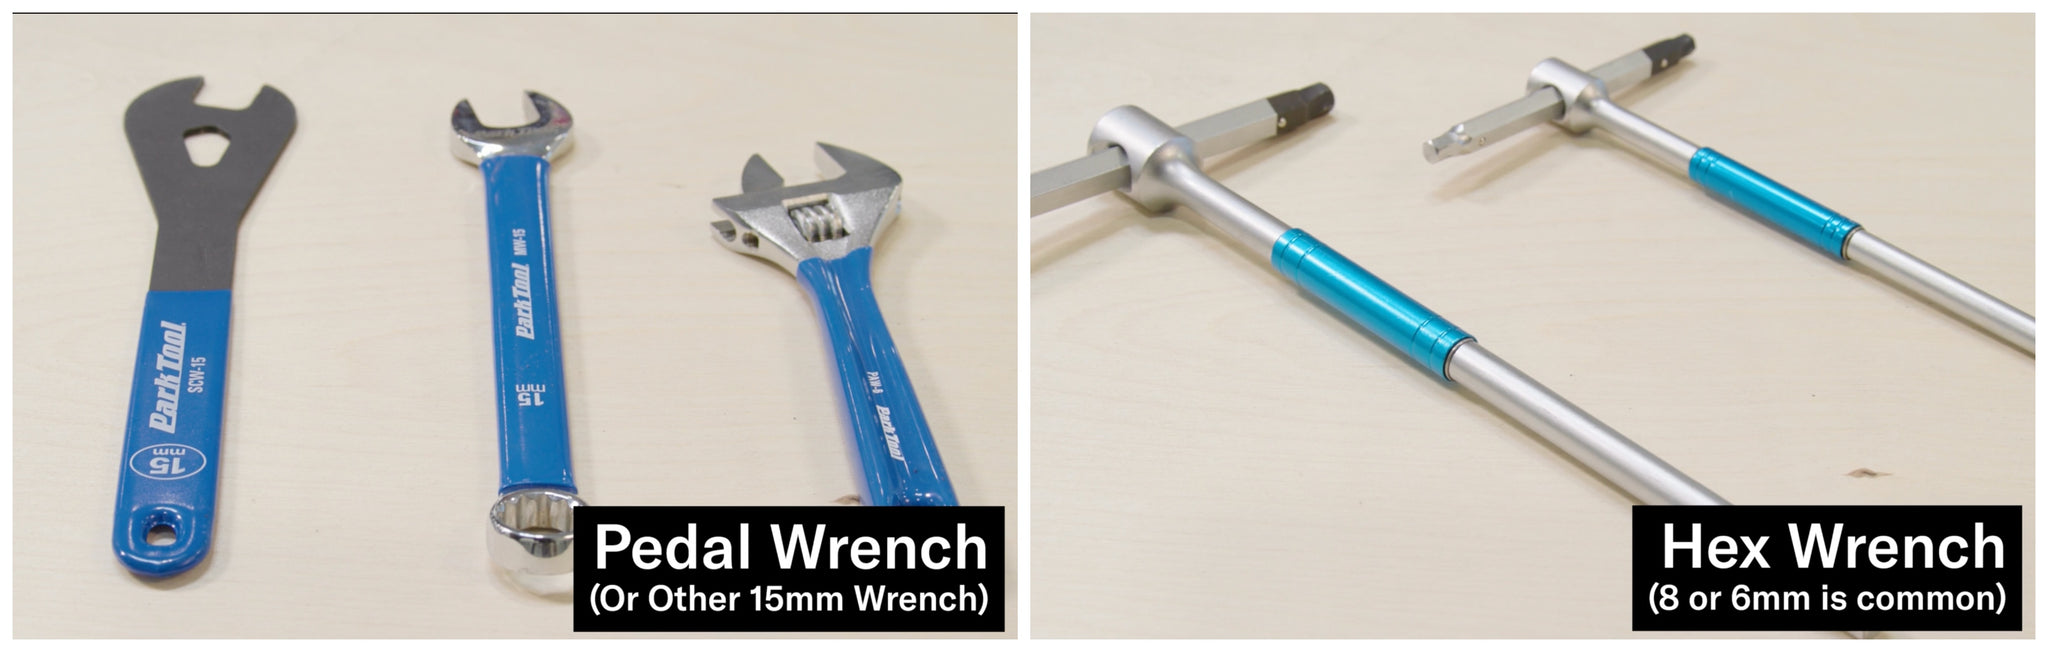 Park Tool PW-4 - Professional Pedal Wrench/Spanner - 360 Cycles